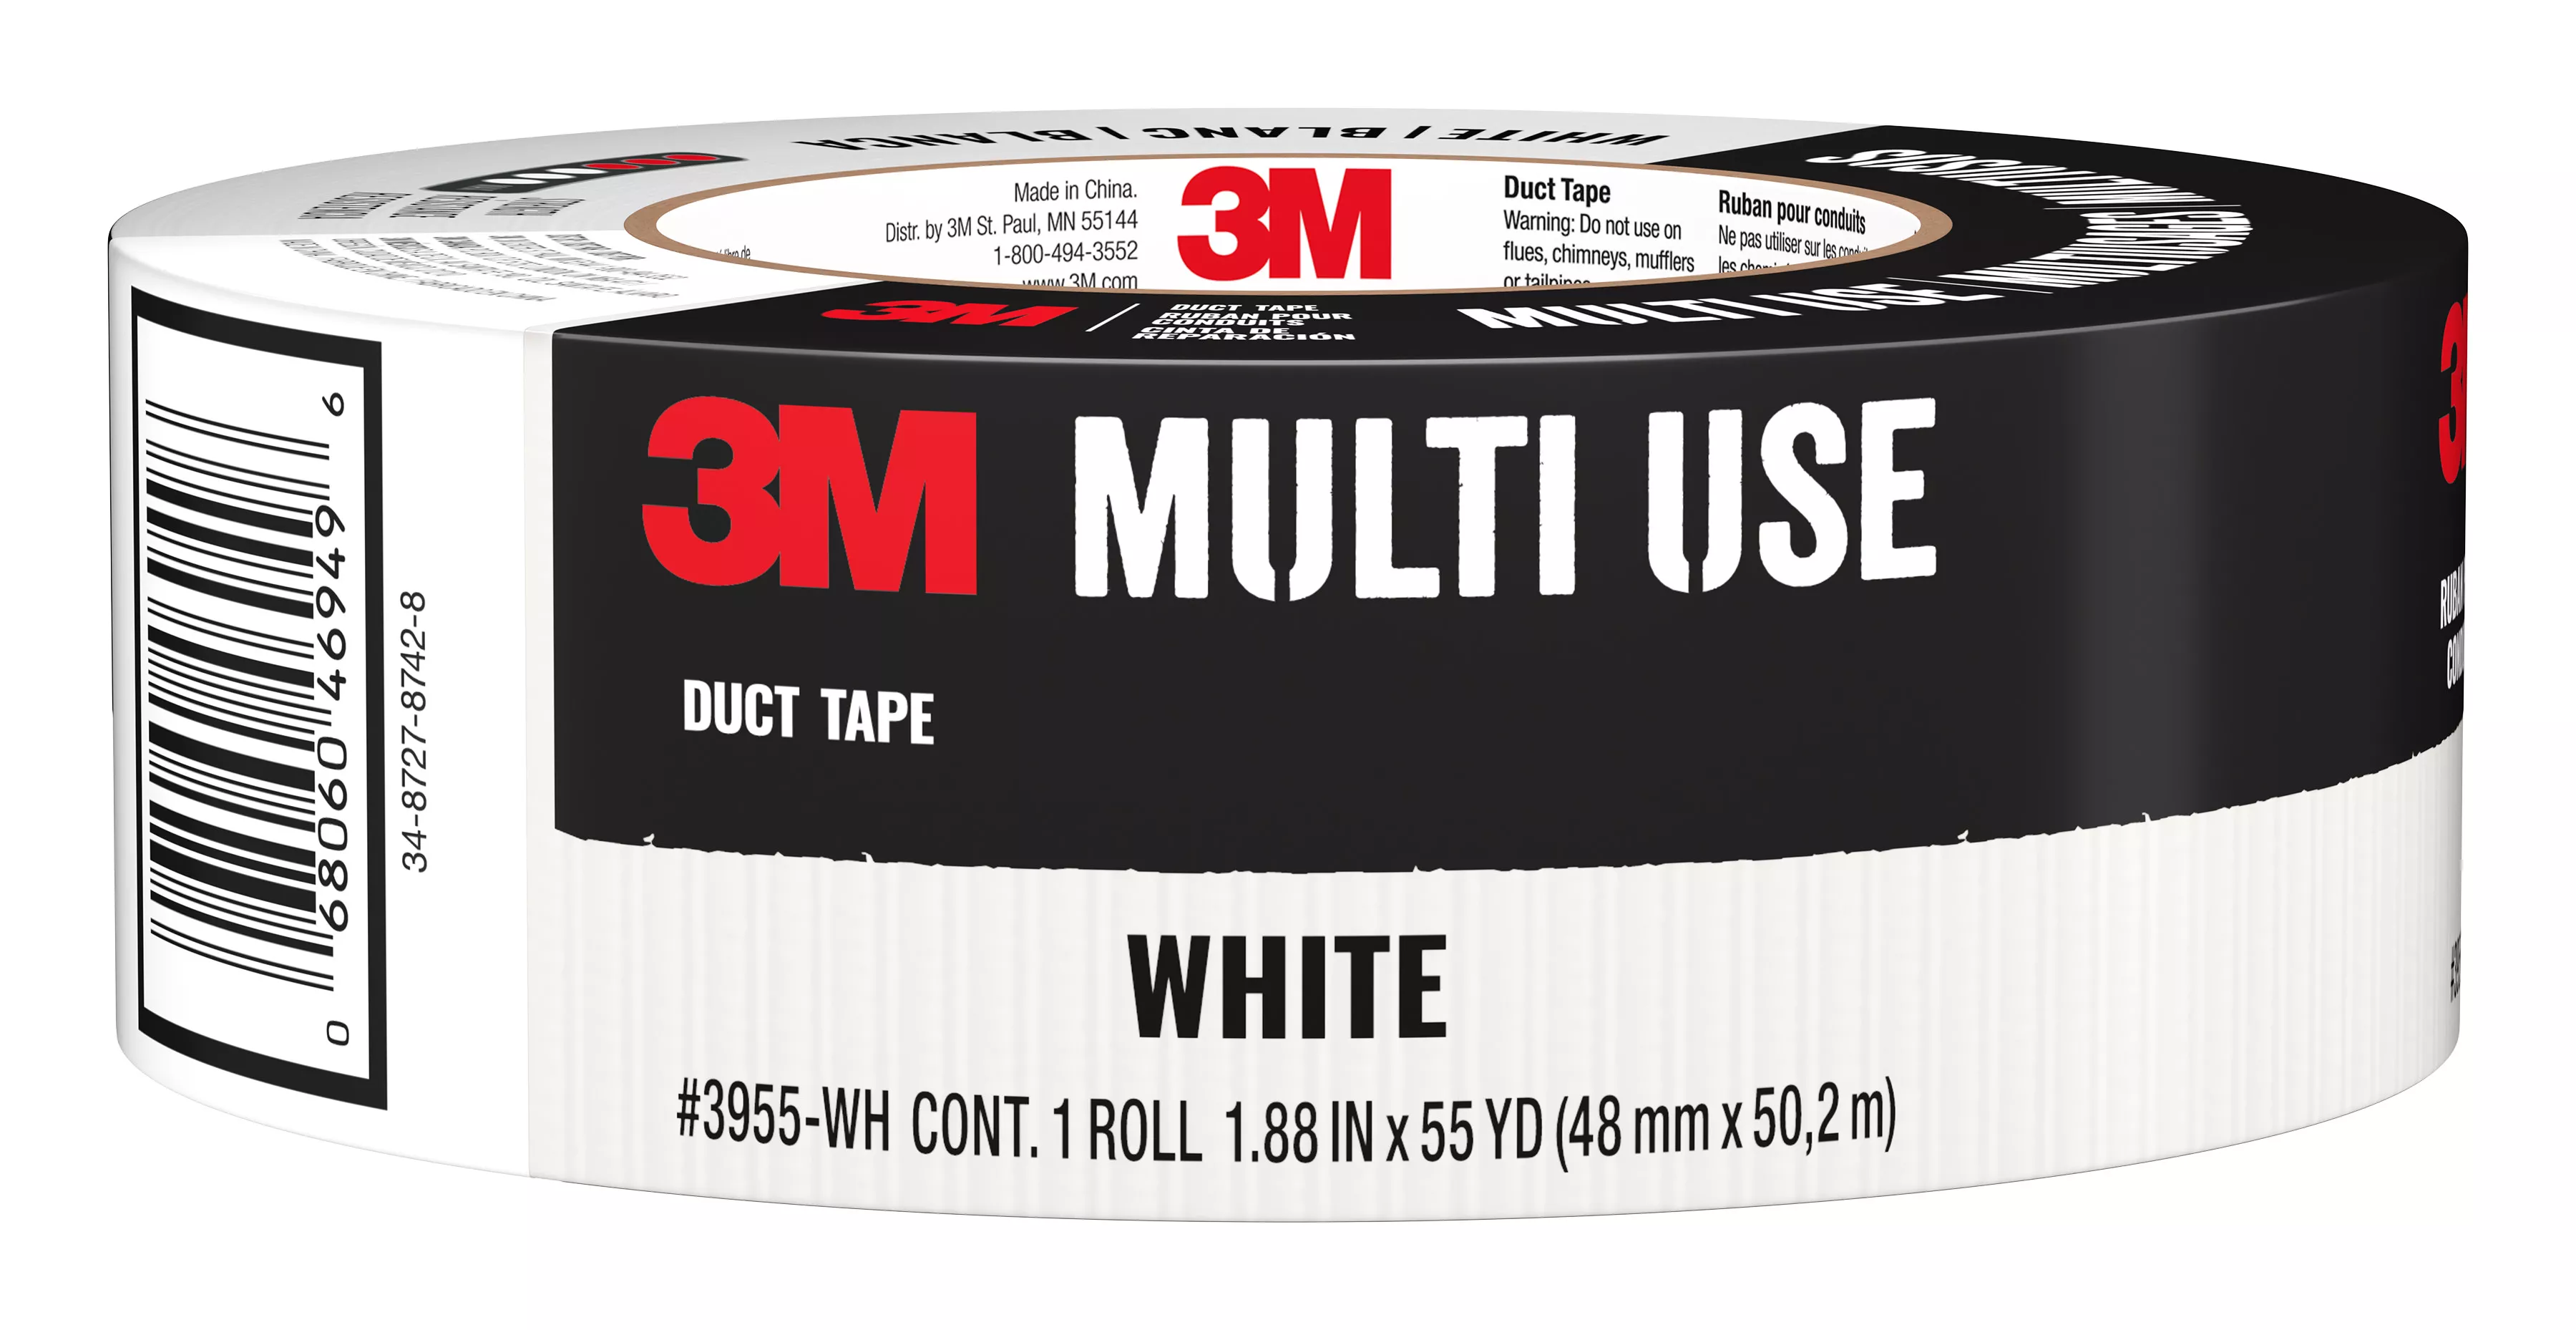 SKU 7100270378 | 3M™ White Duct Tape 3955-WH